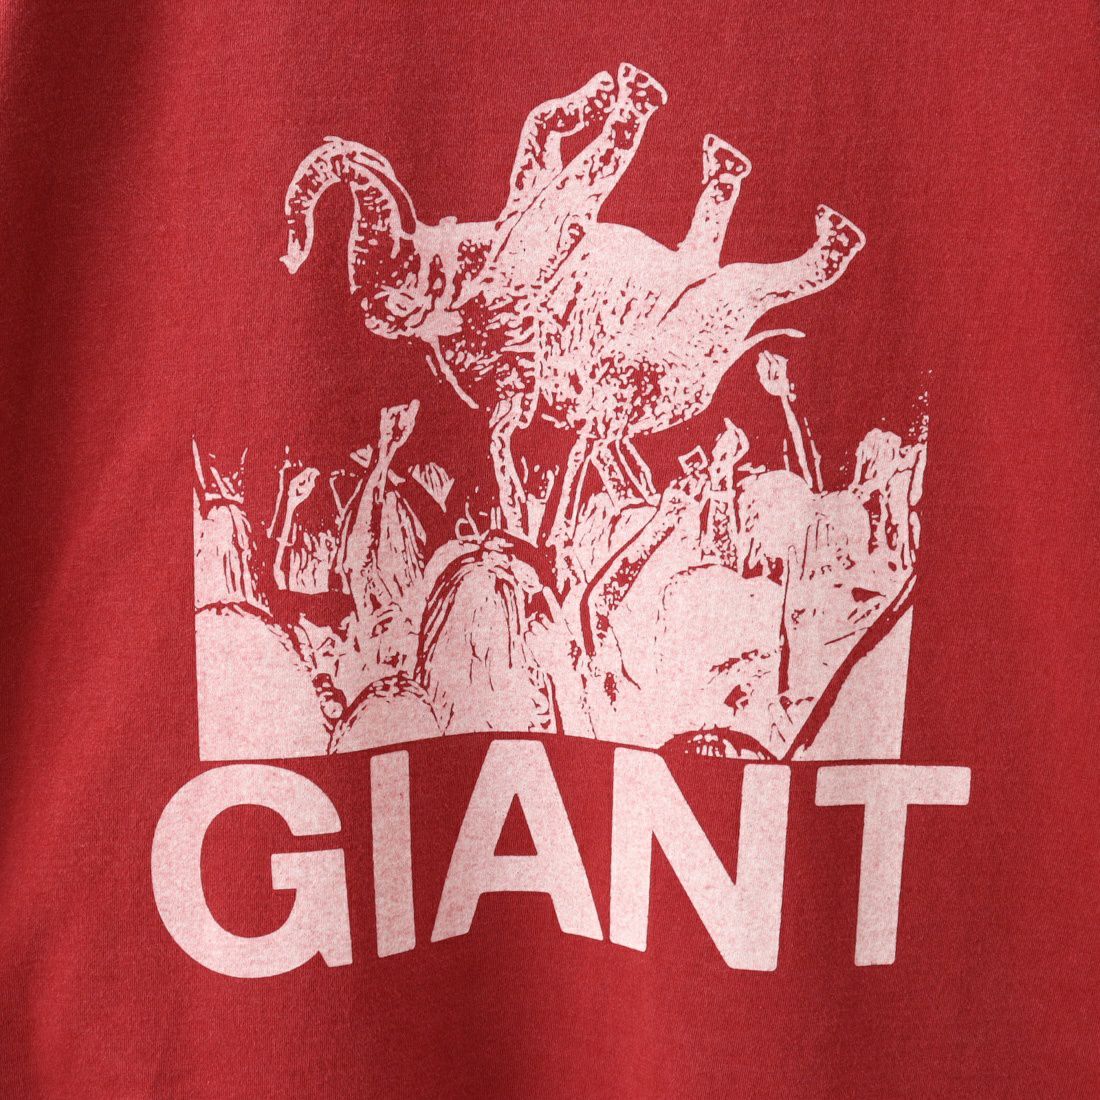 REMI RELIEF [レミレリーフ] 別注 20天竺プリントTシャツ GIANT [RN24329271-JF] RED